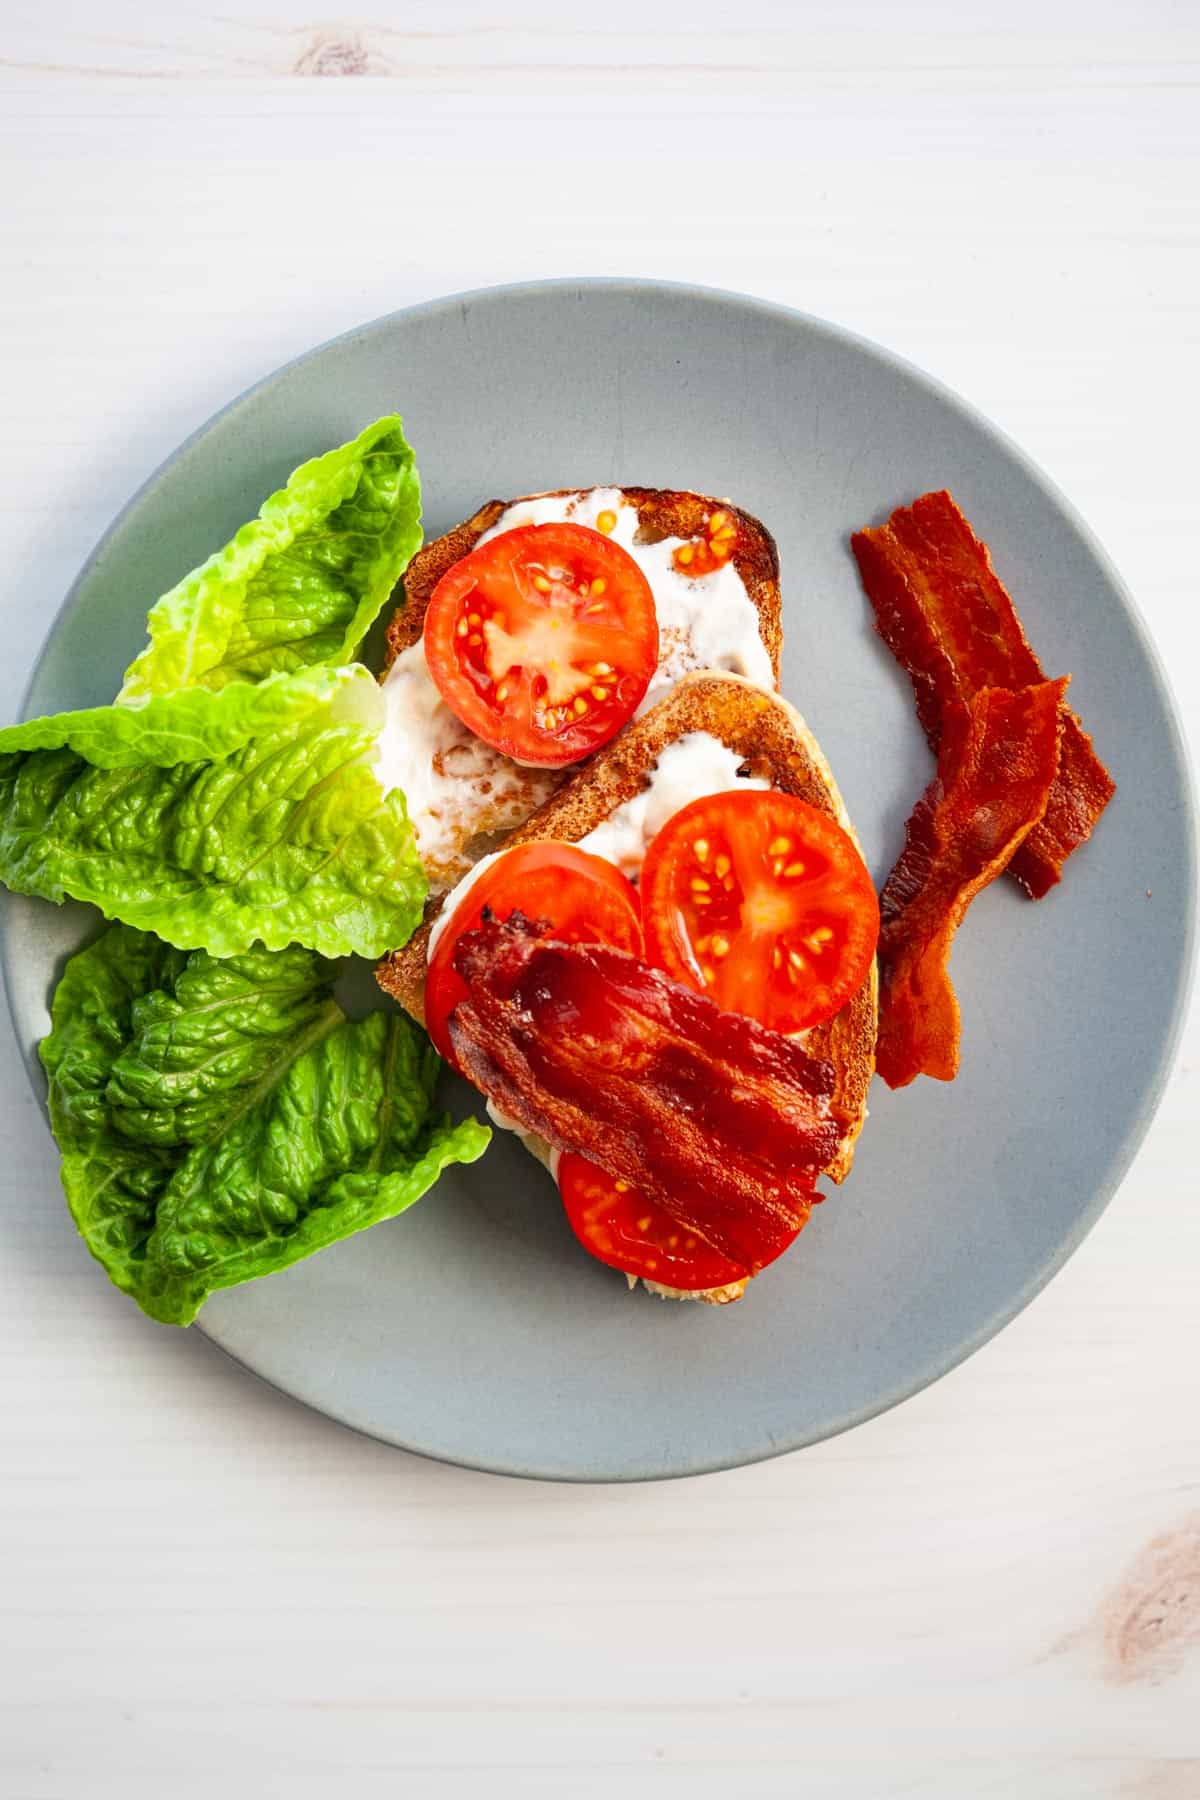 bacon, lettuce and tomato and bread slices with mayonnaise